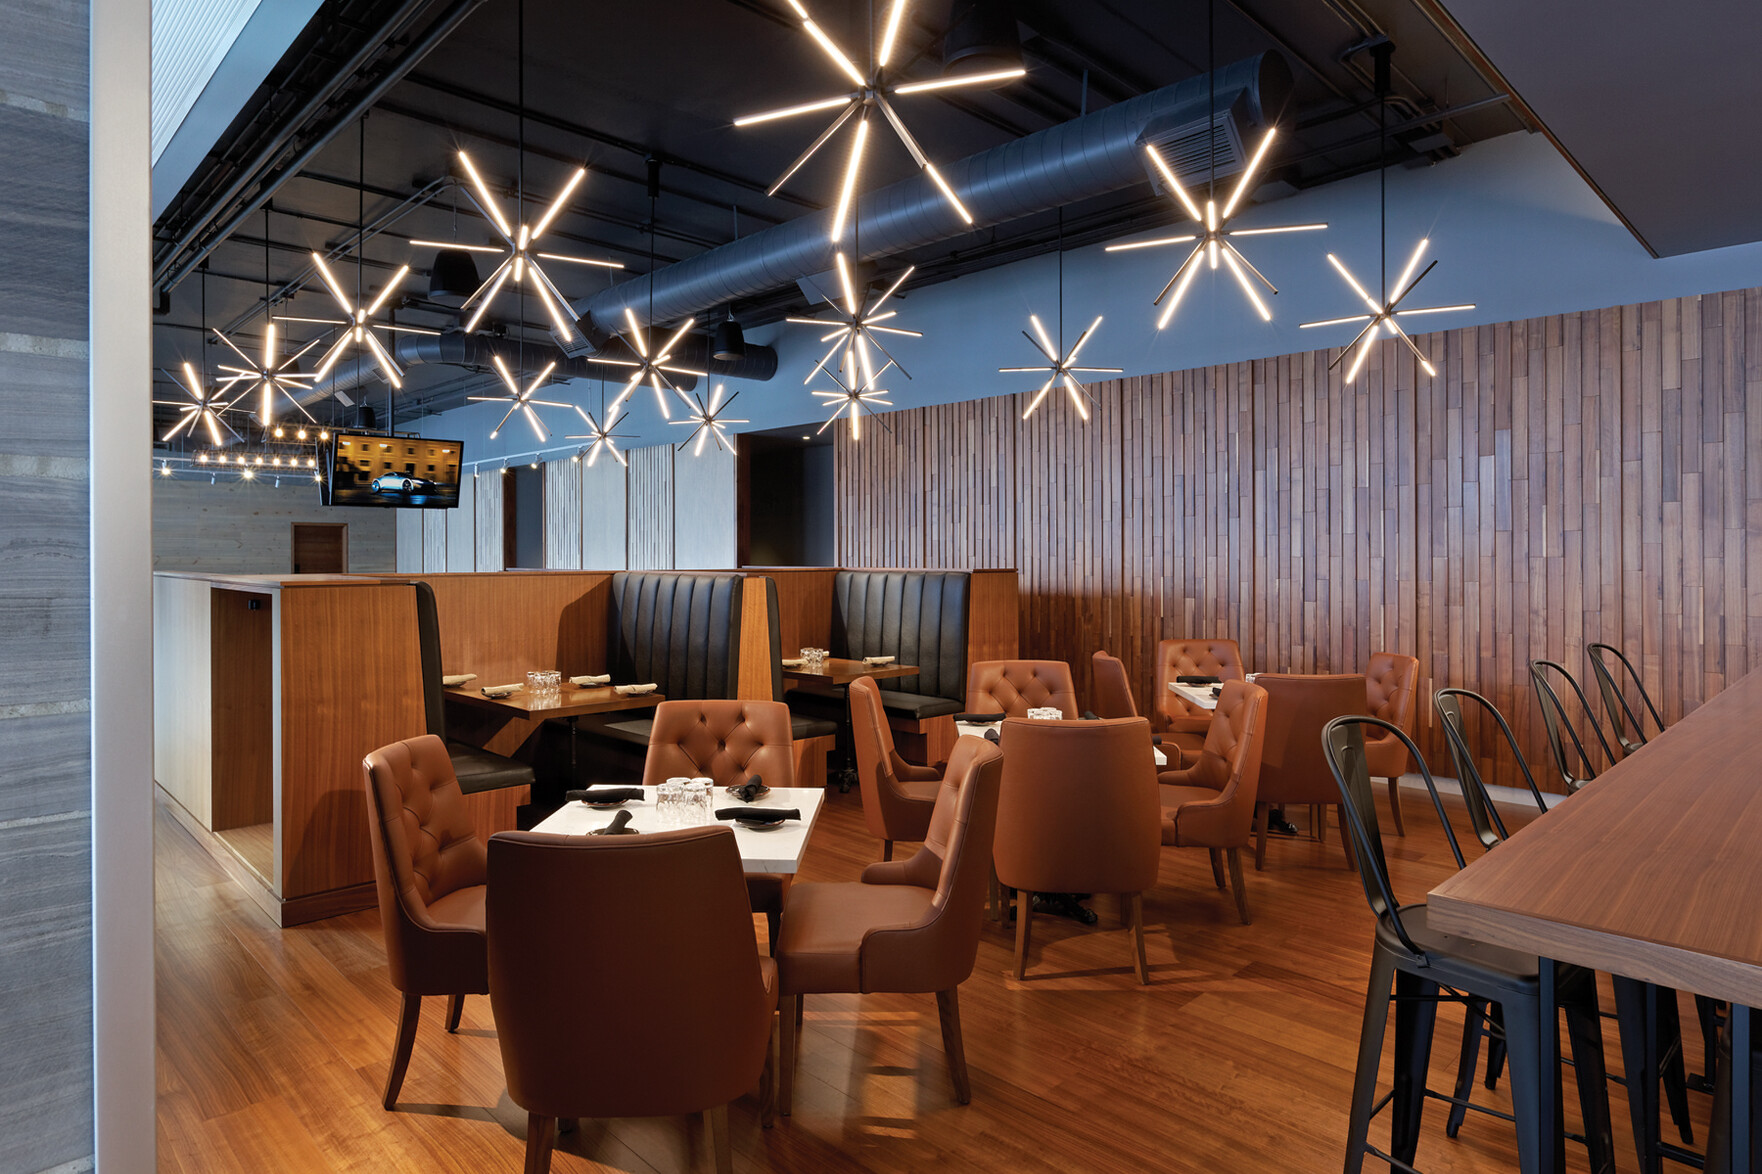 Bar lounge seating with white square tables and tan chairs, black booth seating and star burst light fixtures